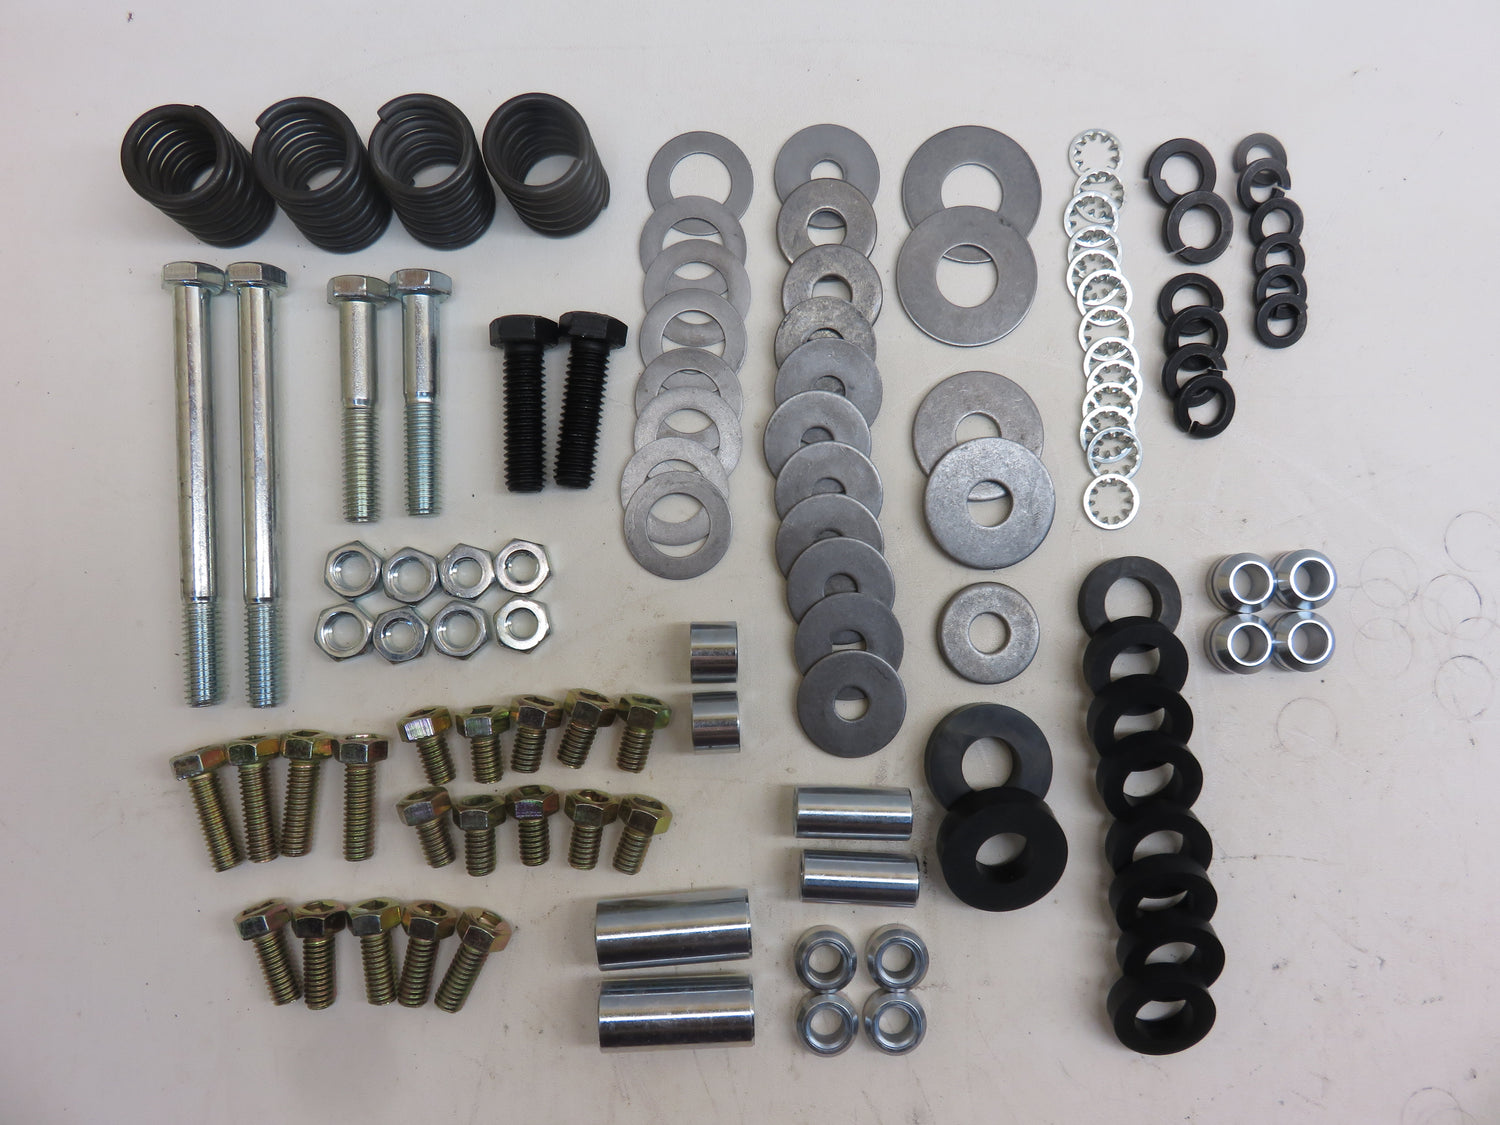 Sheet Metal Bolts And Kits For Old John Deere